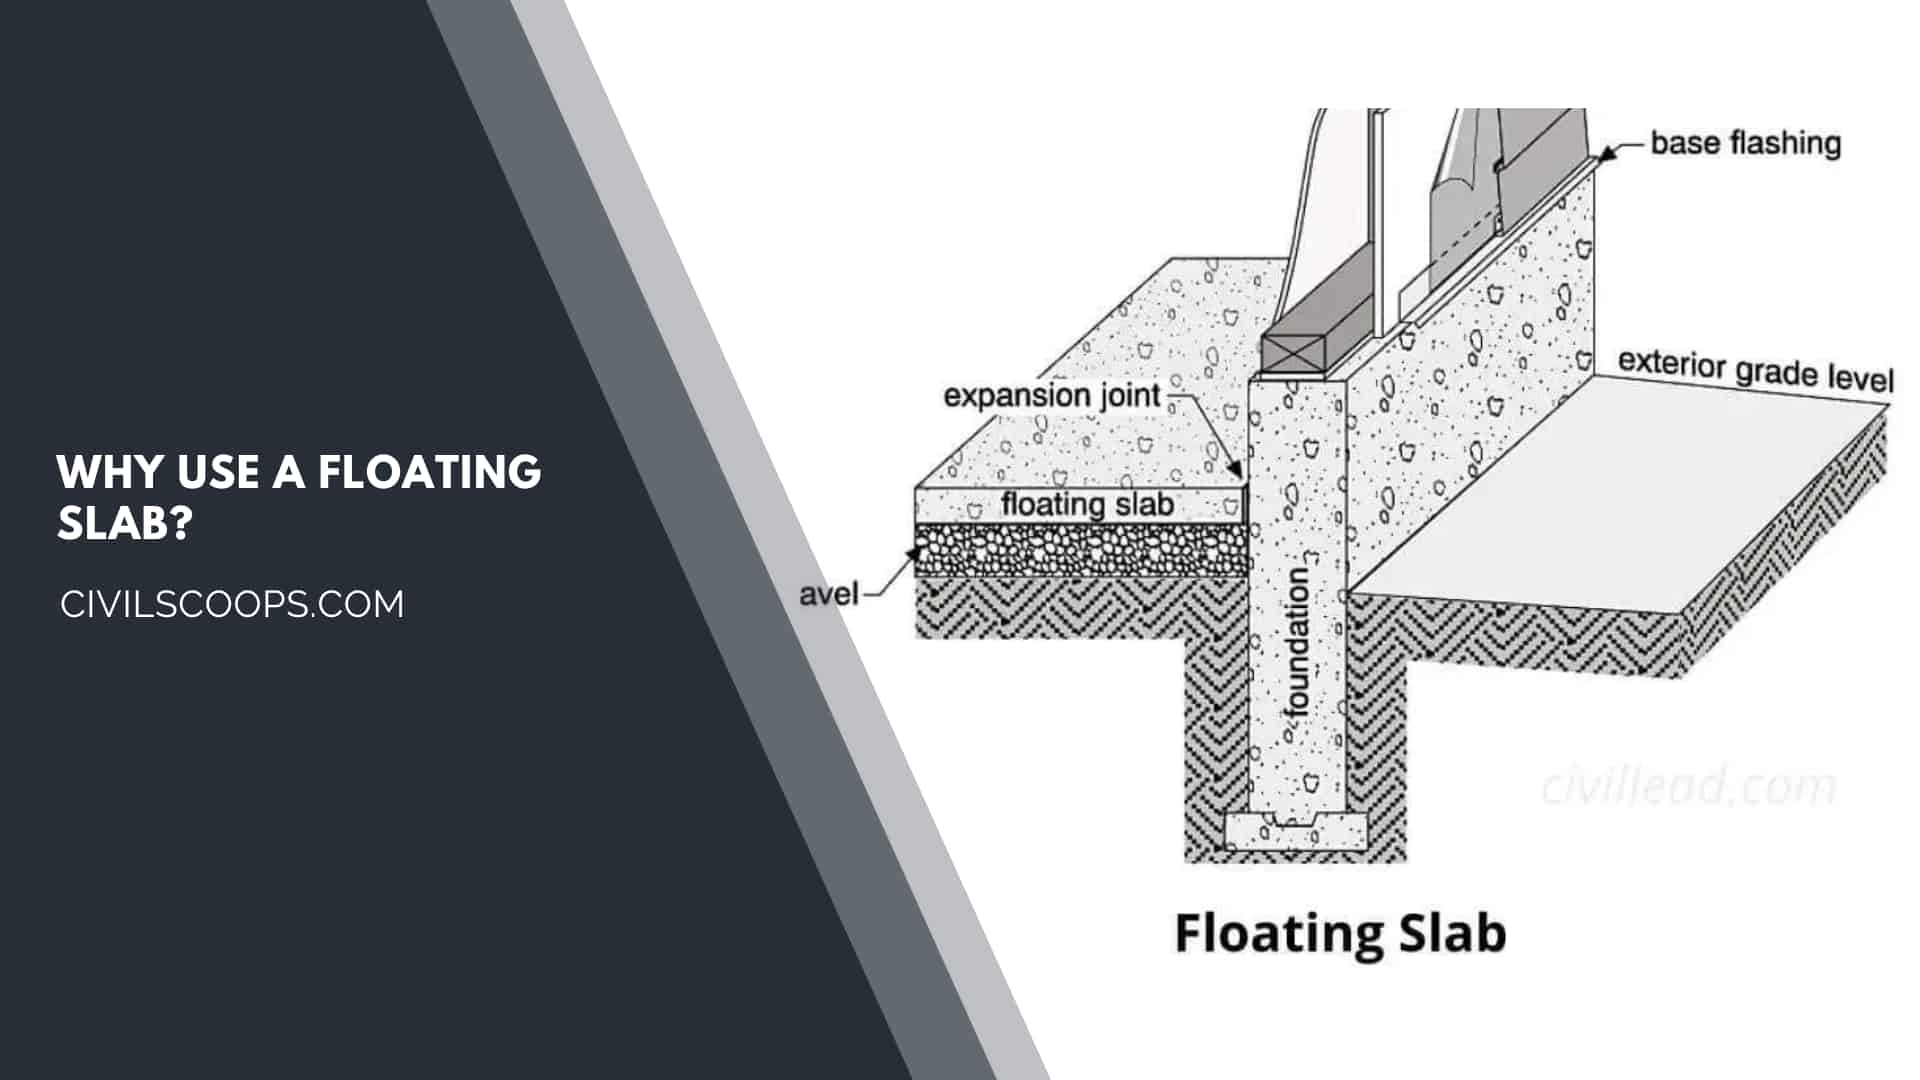 Why Use a Floating Slab?